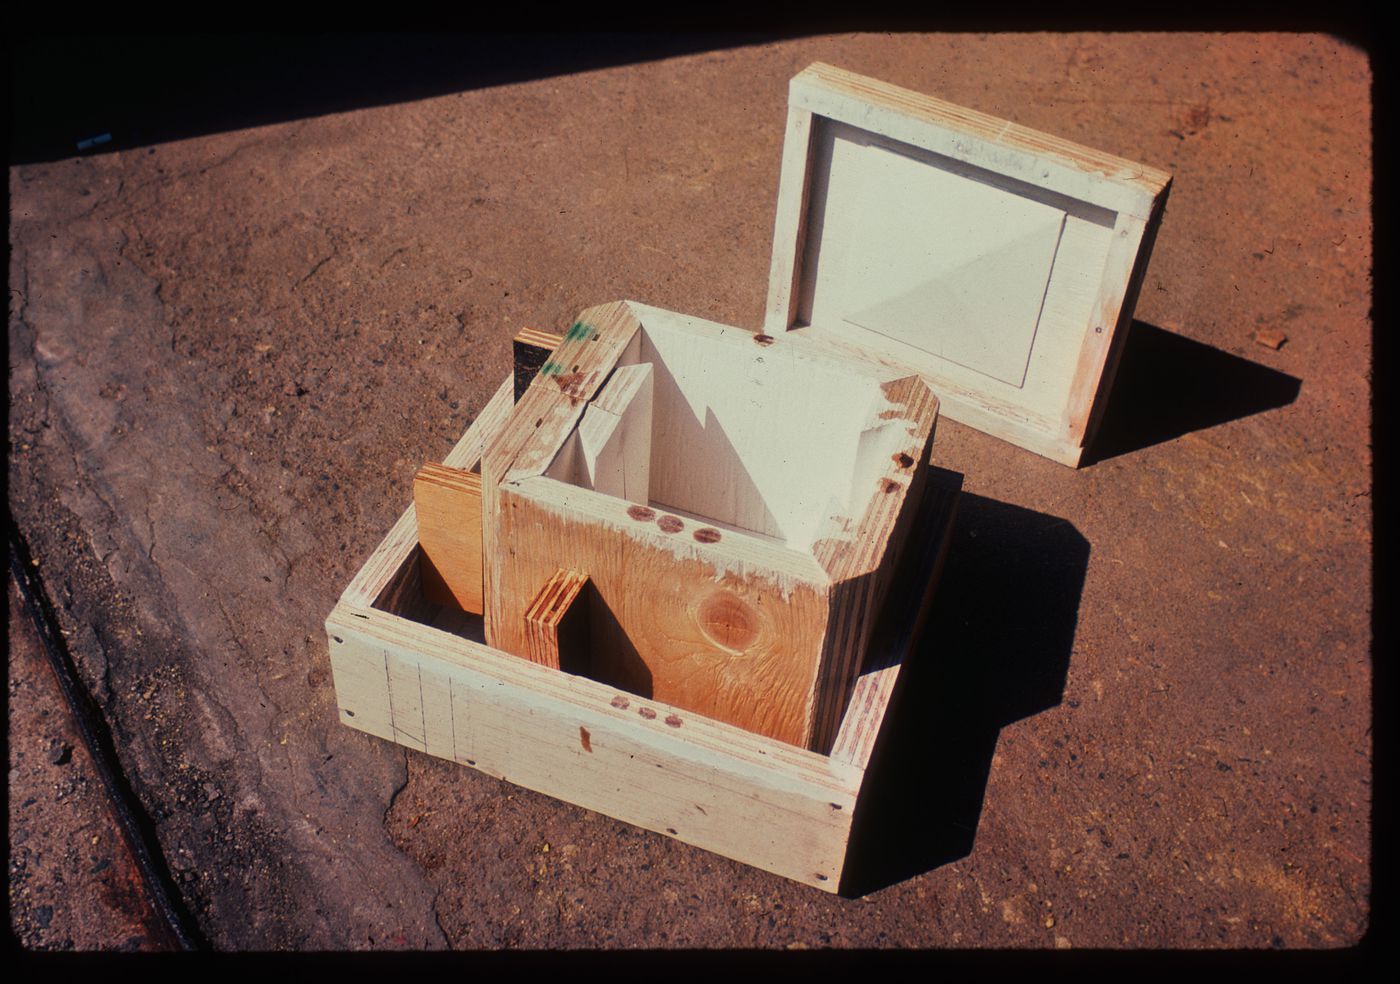 Mold for forming sulphur concrete blocks (image for an illustrated lecture on construction technology using sulphur)